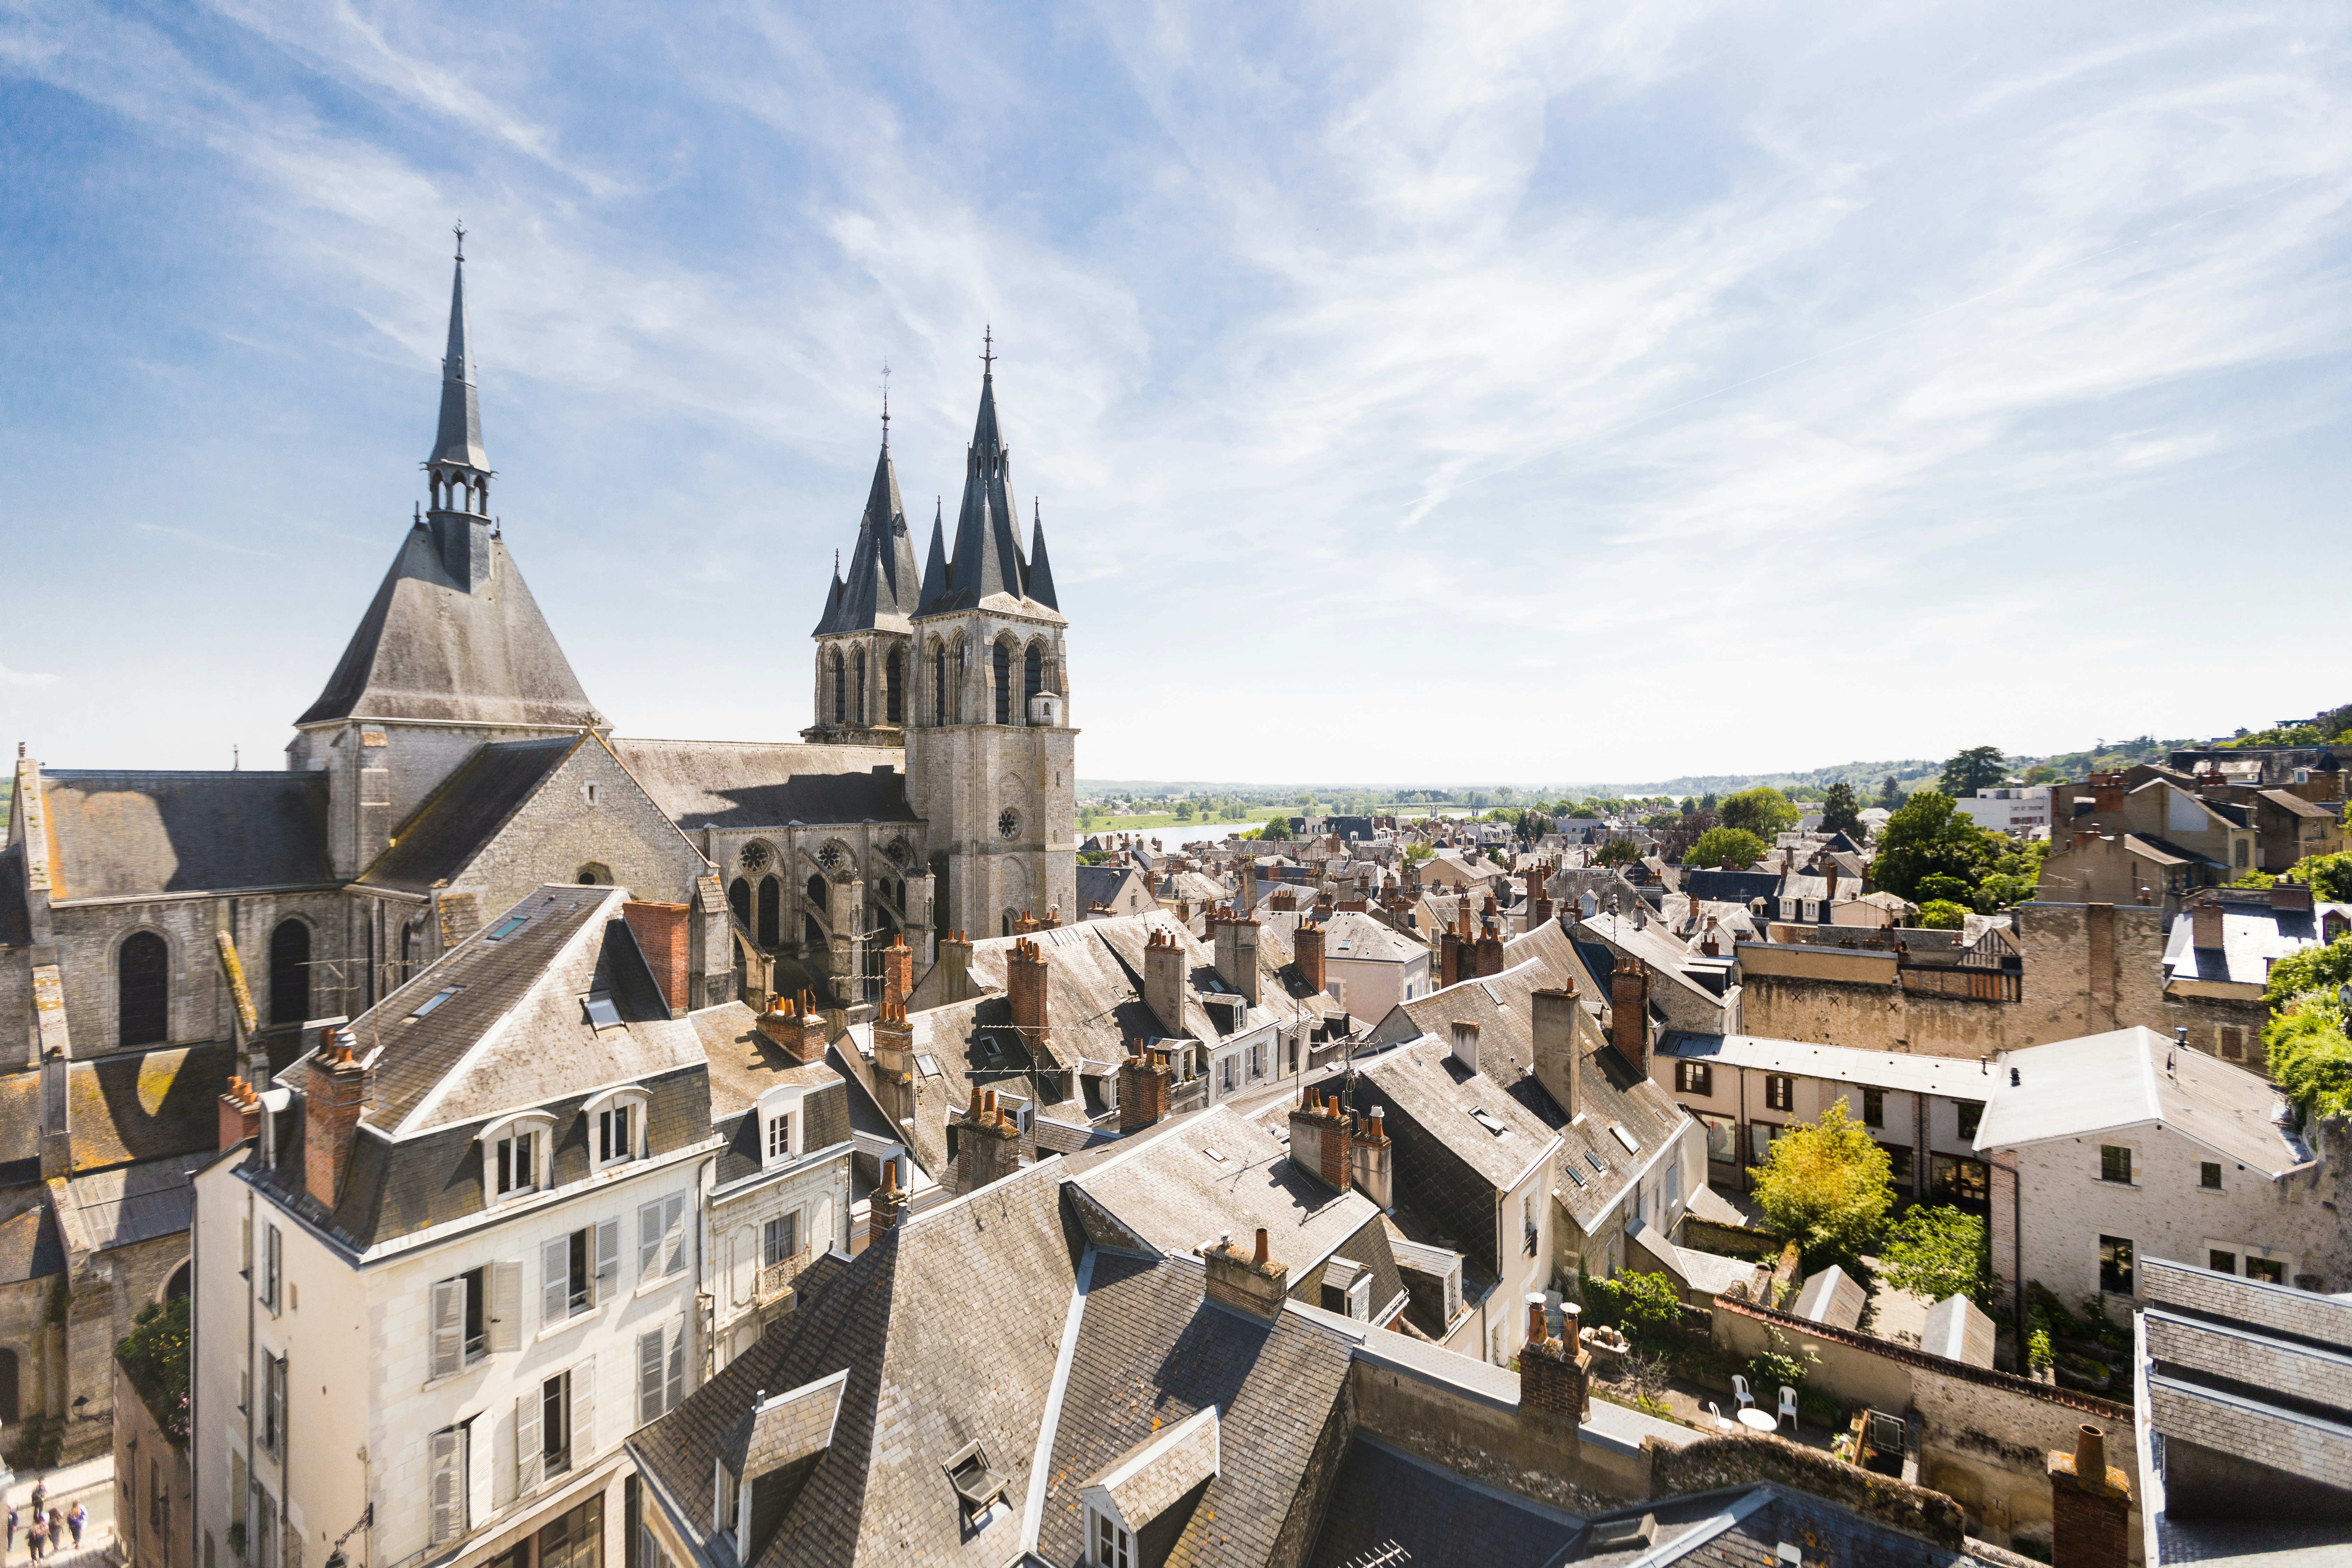 View from the Blois Castle